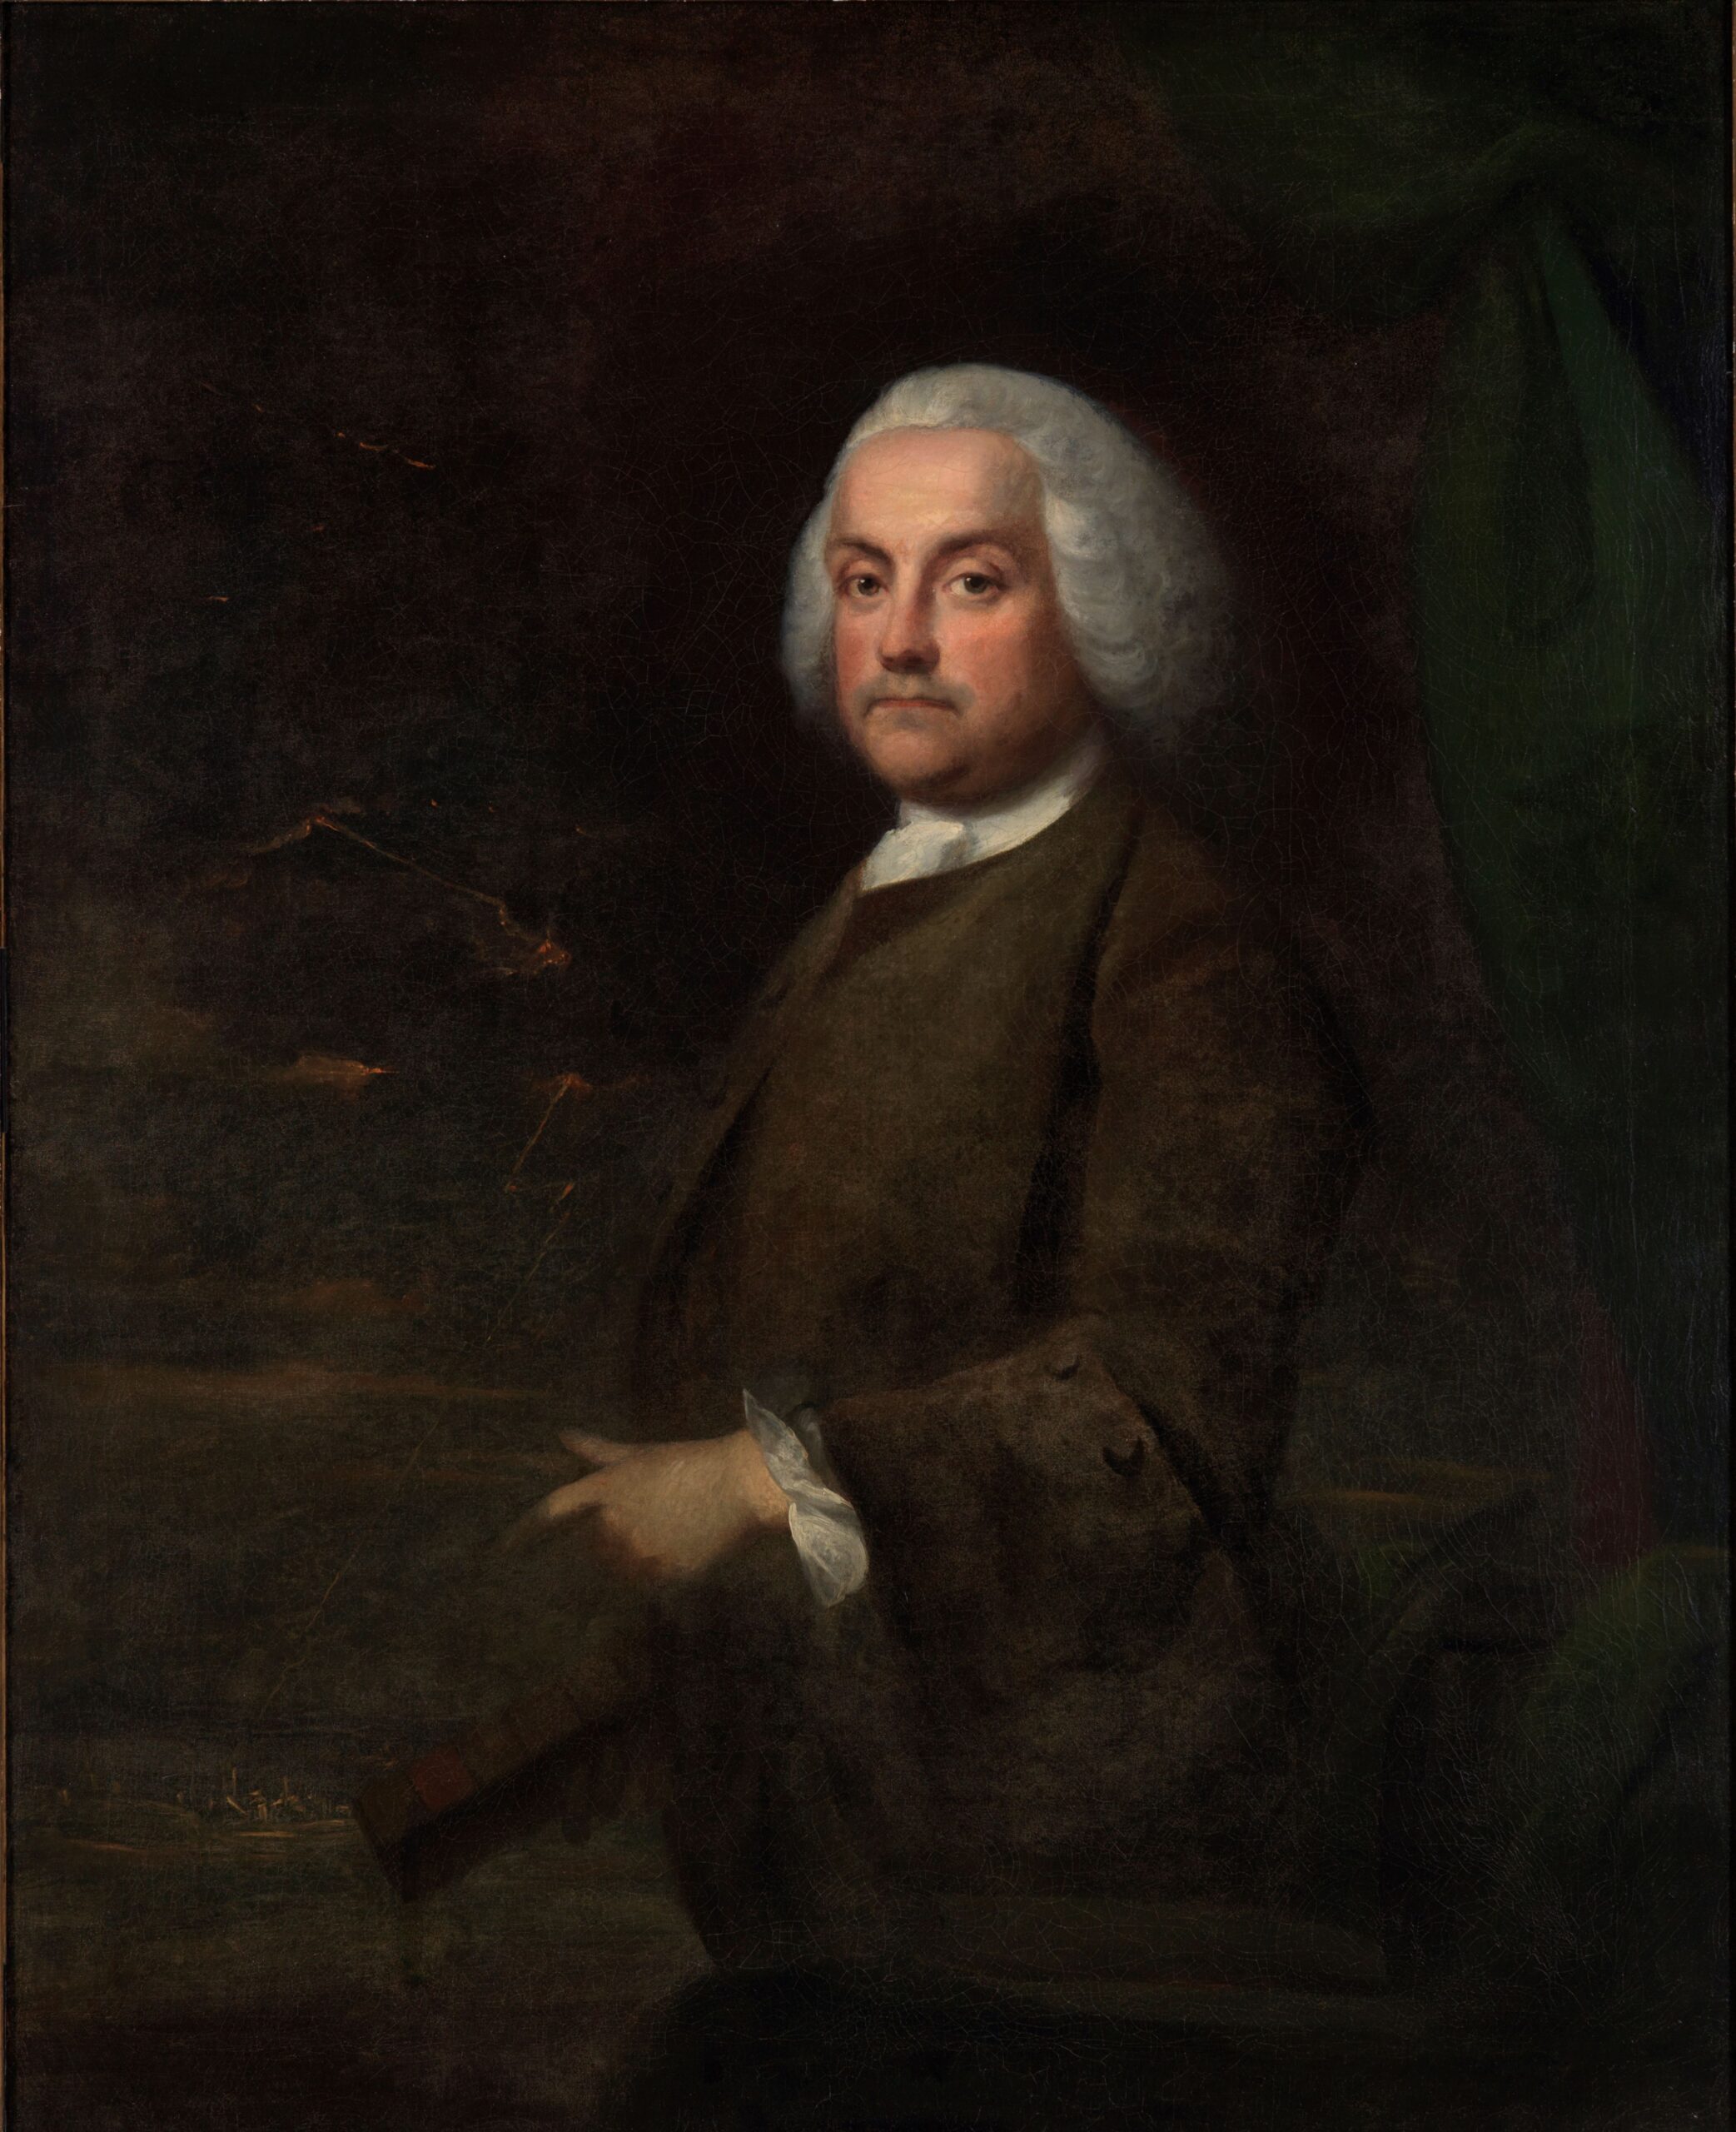 A portrait of a young Benjamin Franklin with gray hair and mustache wearing a white shirt and a brown jacket